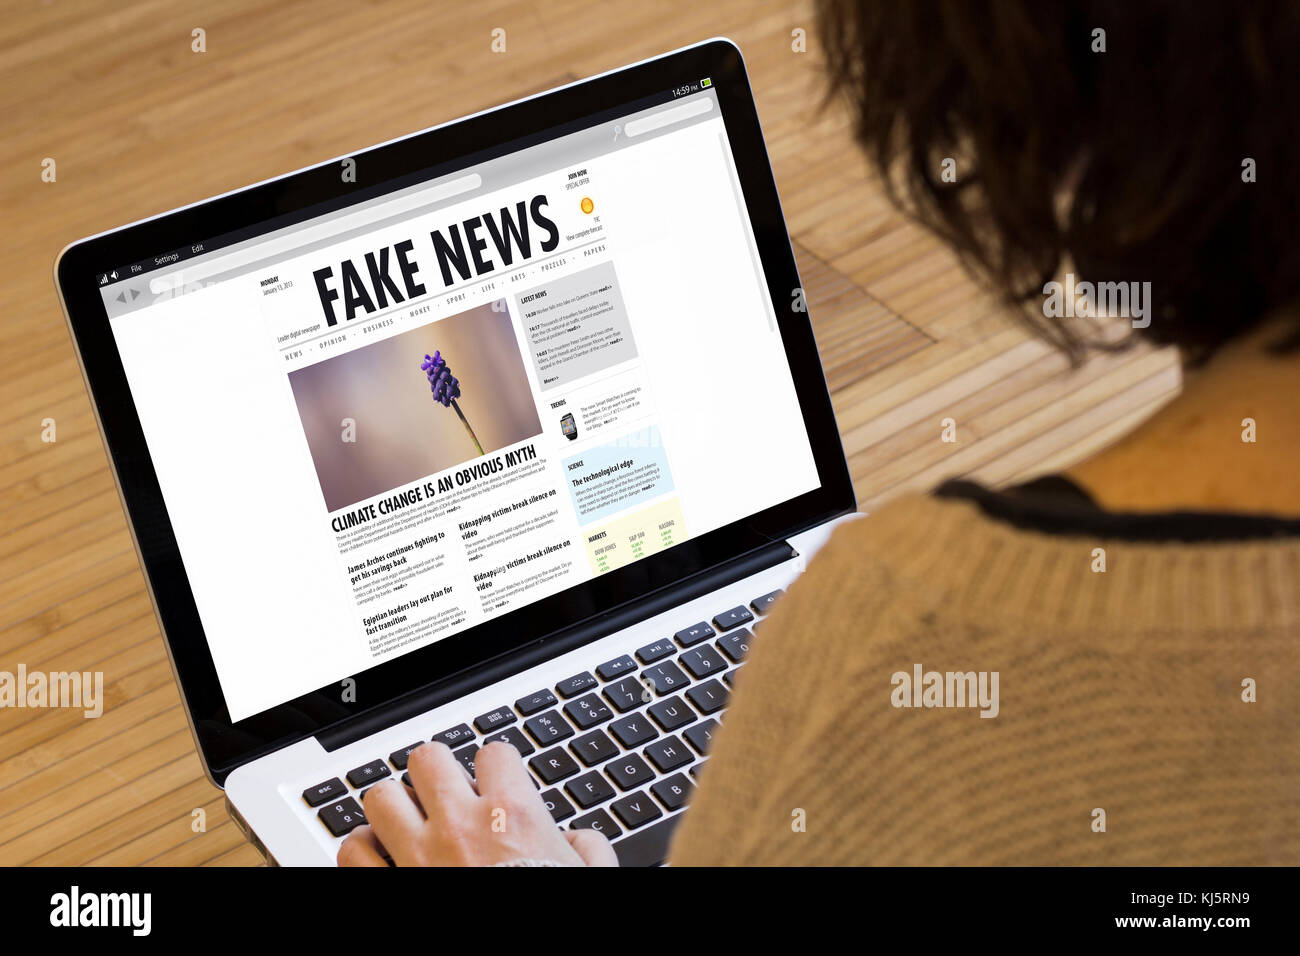 fake news concept on a laptop screen. Screen graphics are made up. Stock Photo